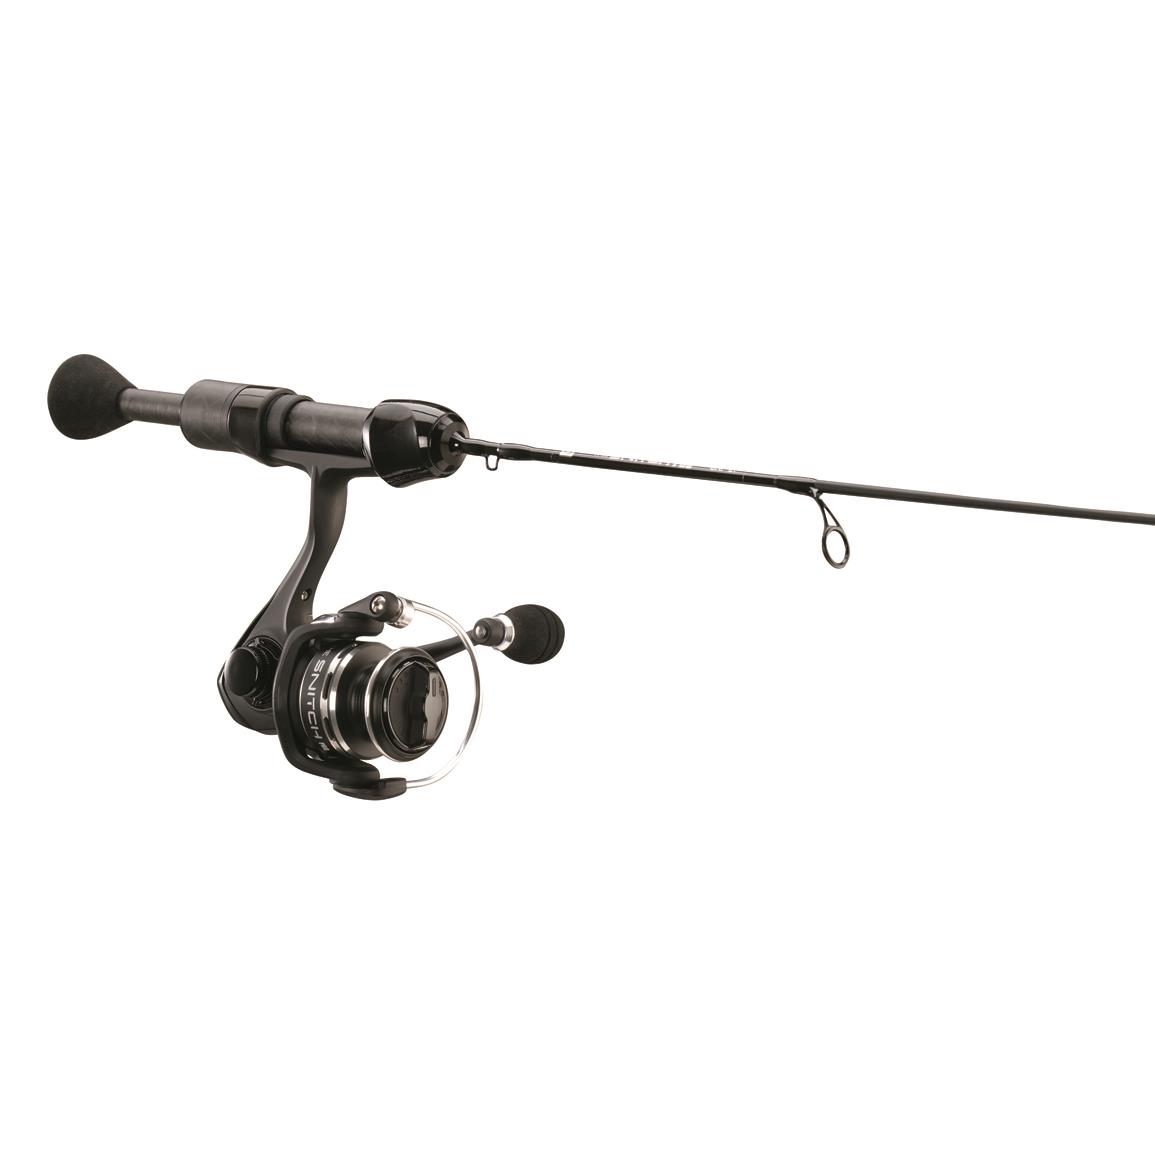 13 Fishing Snitch Pro Ice Fishing Spinning Rod and Reel Combo, 32" Length, Quick Tip